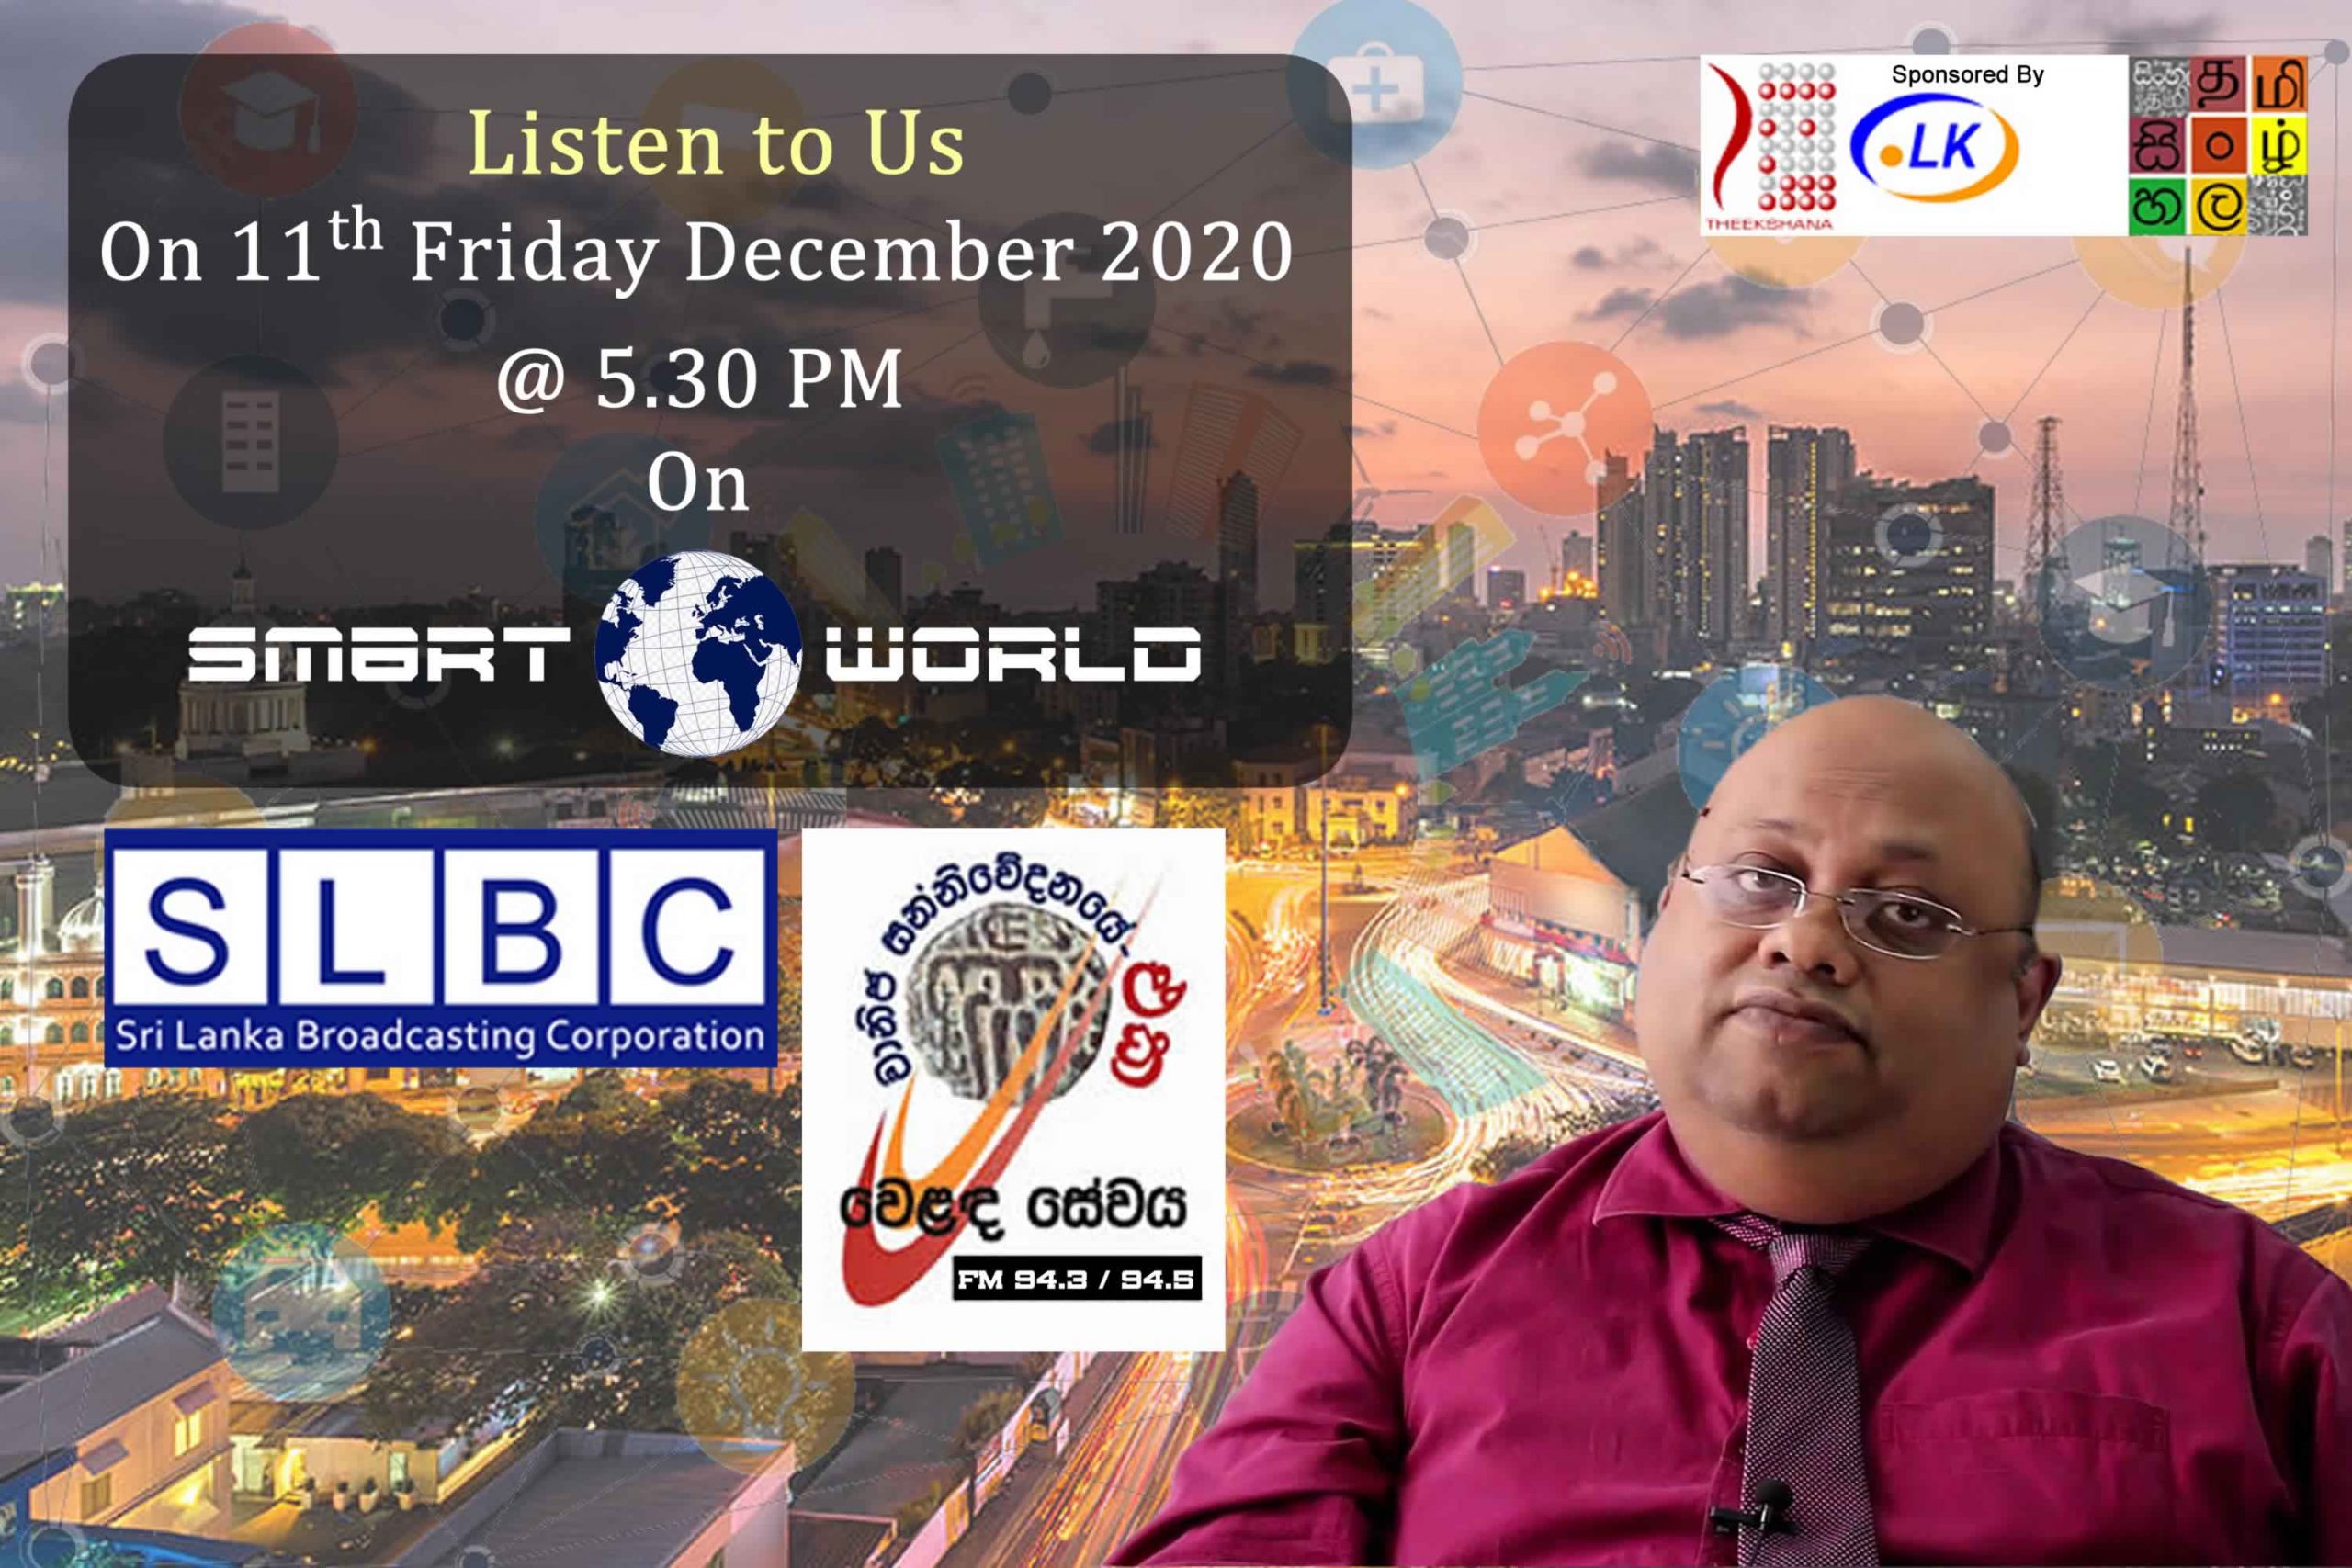 Listen to “Smart World” on this Friday (11th December 2020) at 5.30 pm on SLBC Sinhala Commercial Service (FM 94.3 / 94.5).